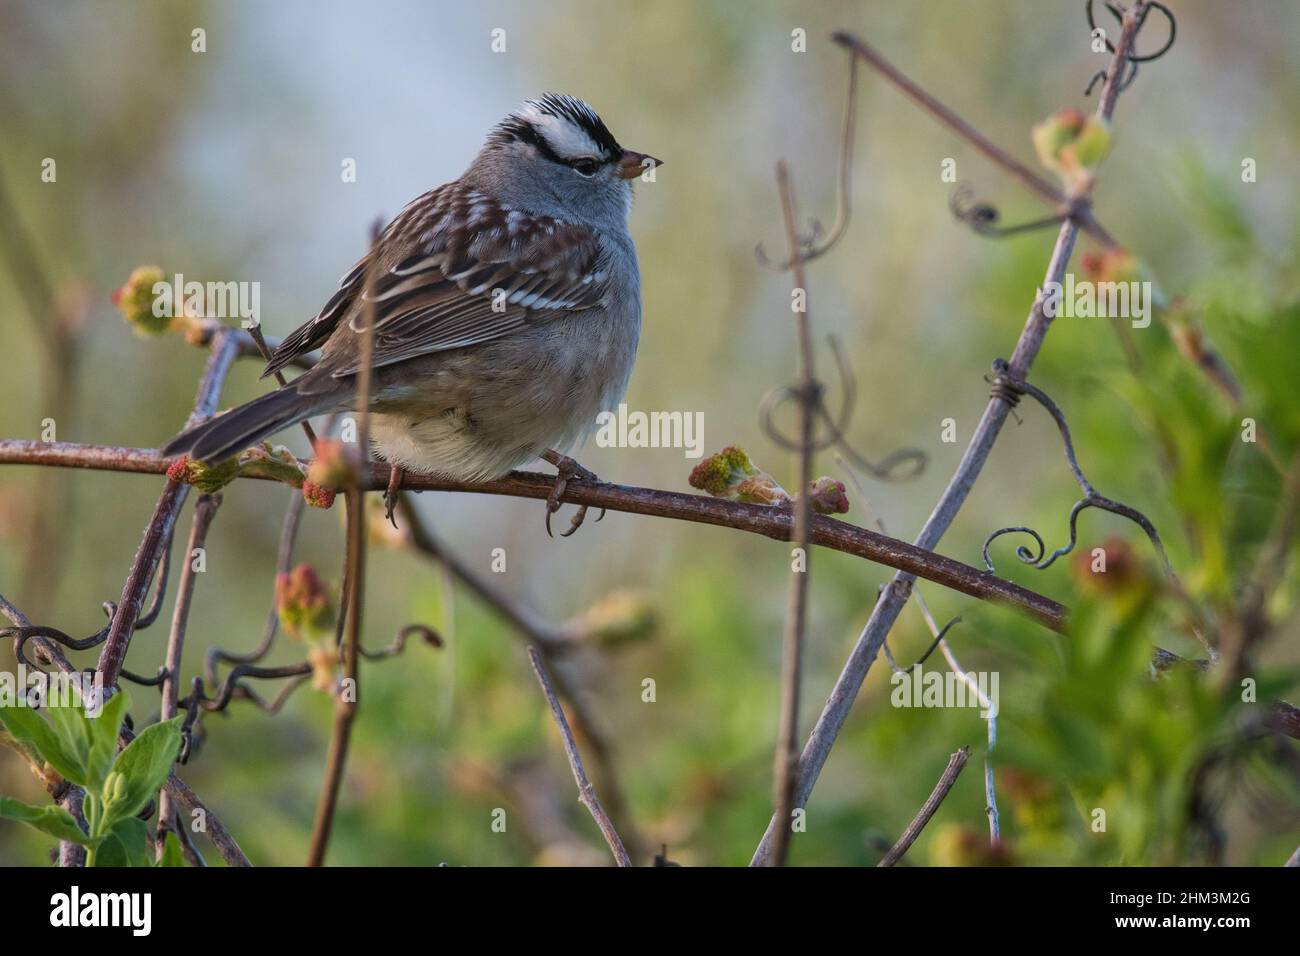 White-Crowned Sparrow perched amongst foliage Stock Photo